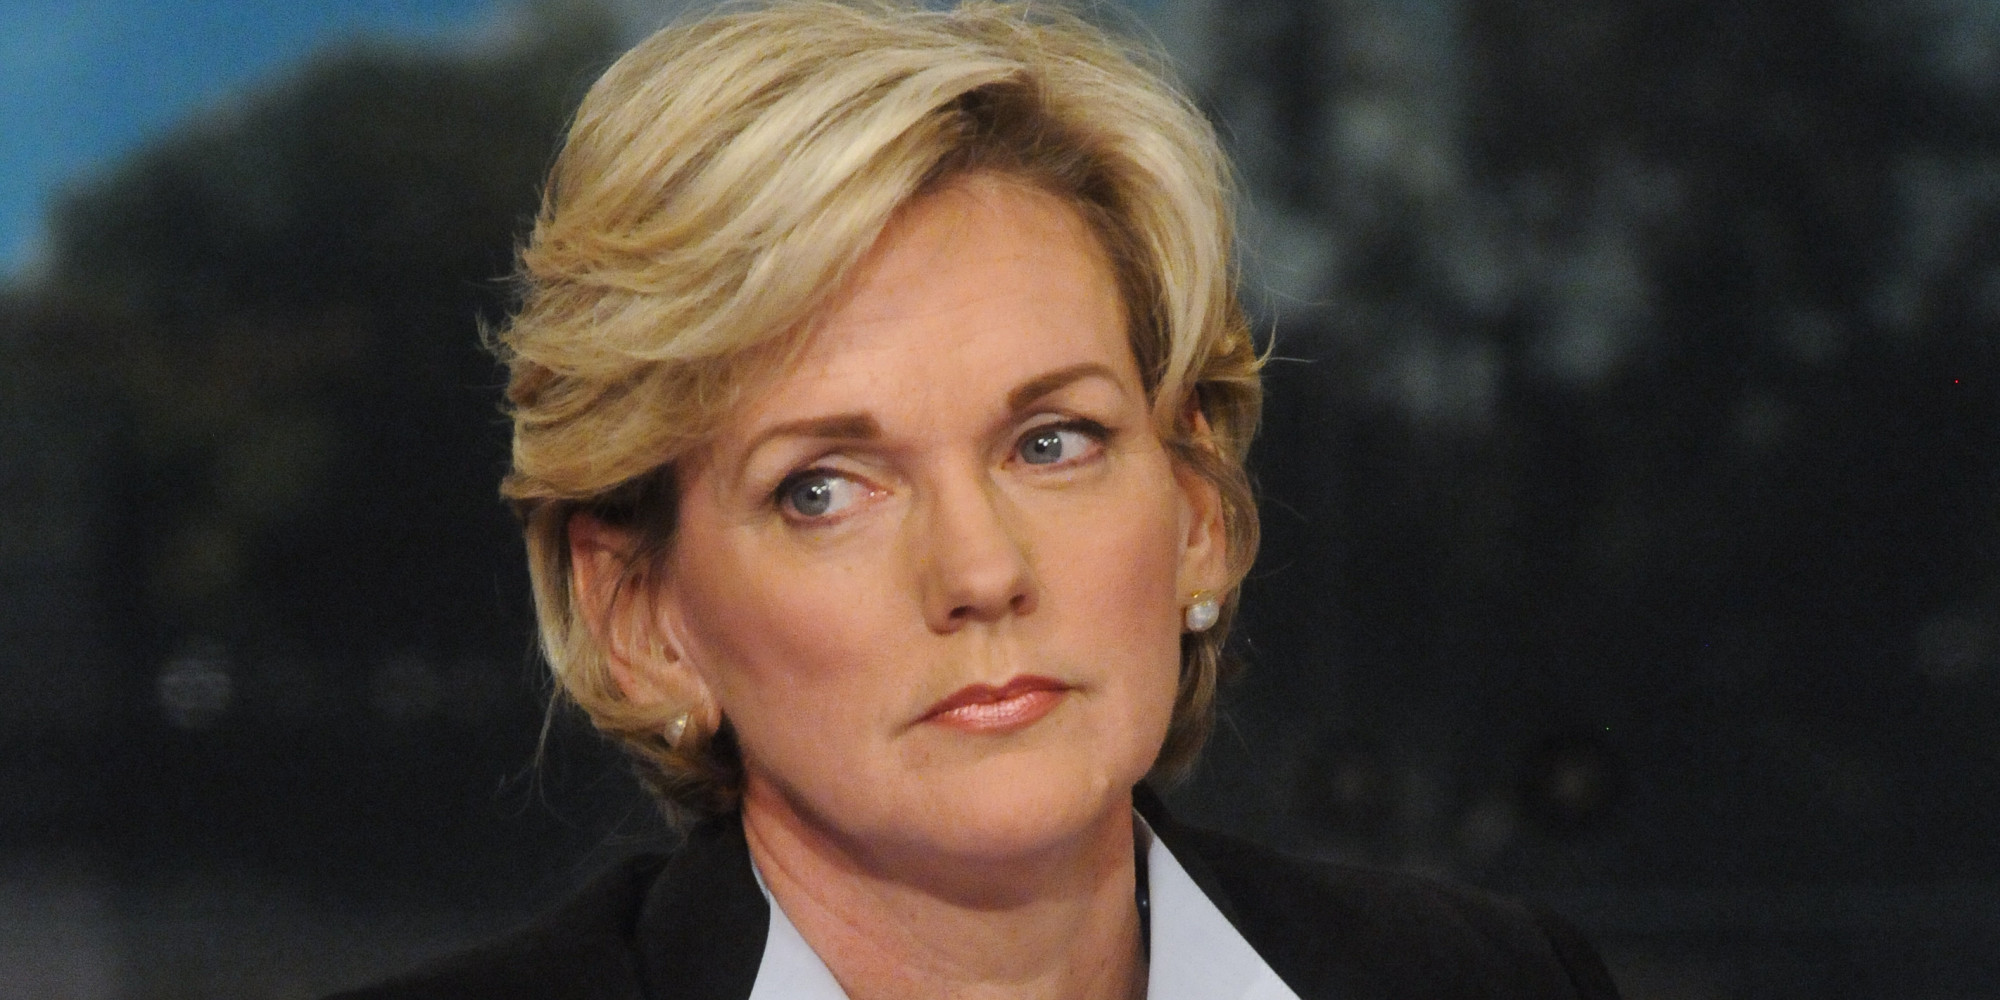 Granholm, who served from 2003 to 2011, was the state's first female g...